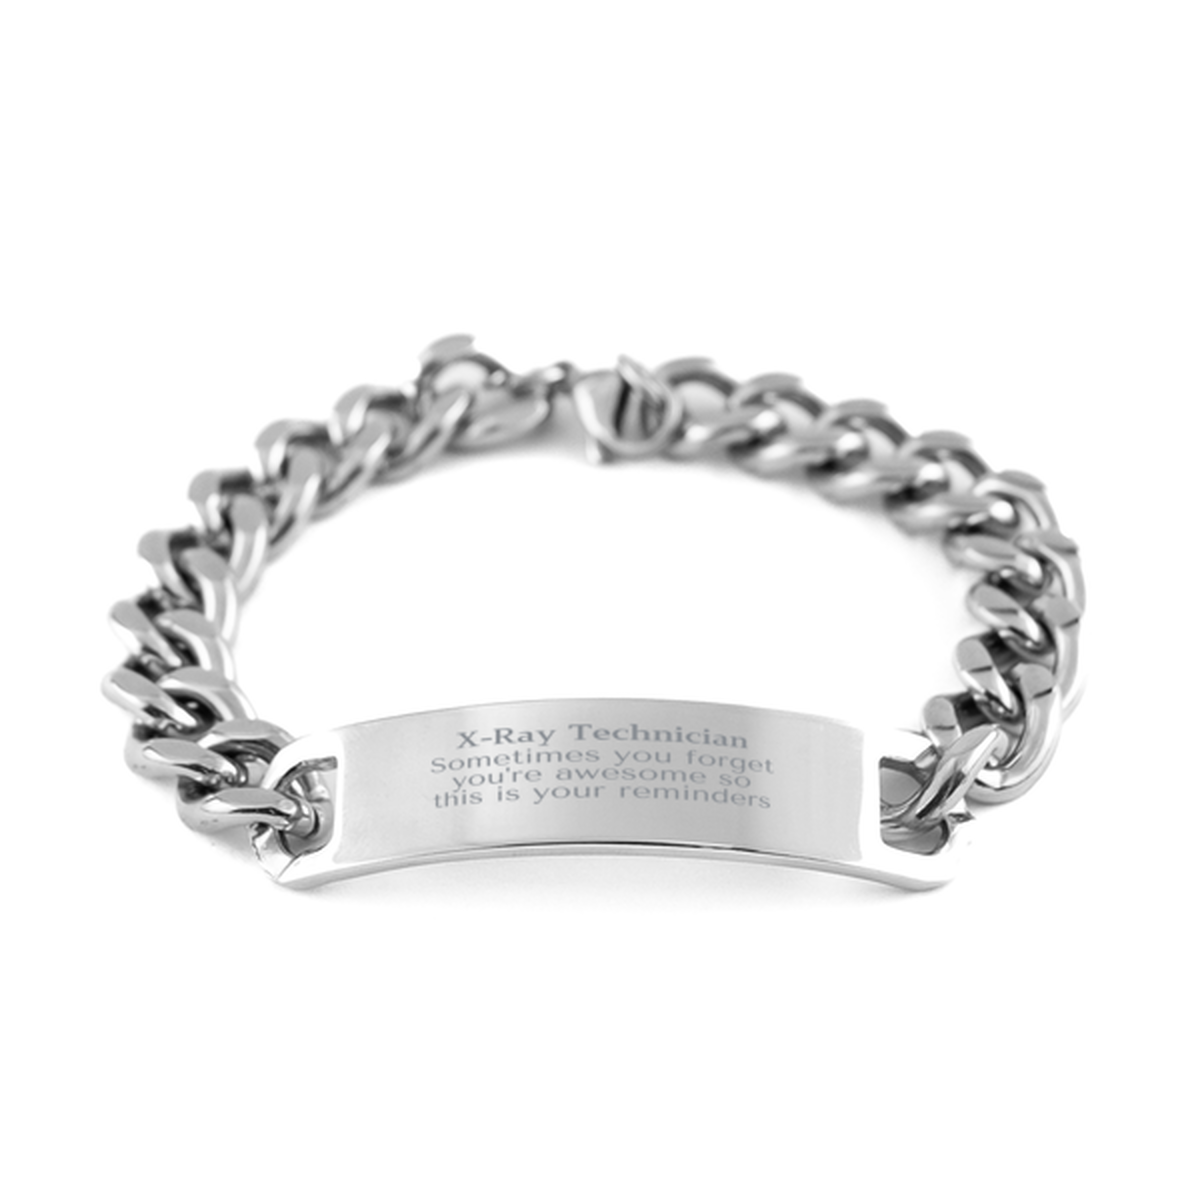 Sentimental X-Ray Technician Cuban Chain Stainless Steel Bracelet, X-Ray Technician Sometimes you forget you're awesome so this is your reminders, Graduation Christmas Birthday Gifts for X-Ray Technician, Men, Women, Coworkers